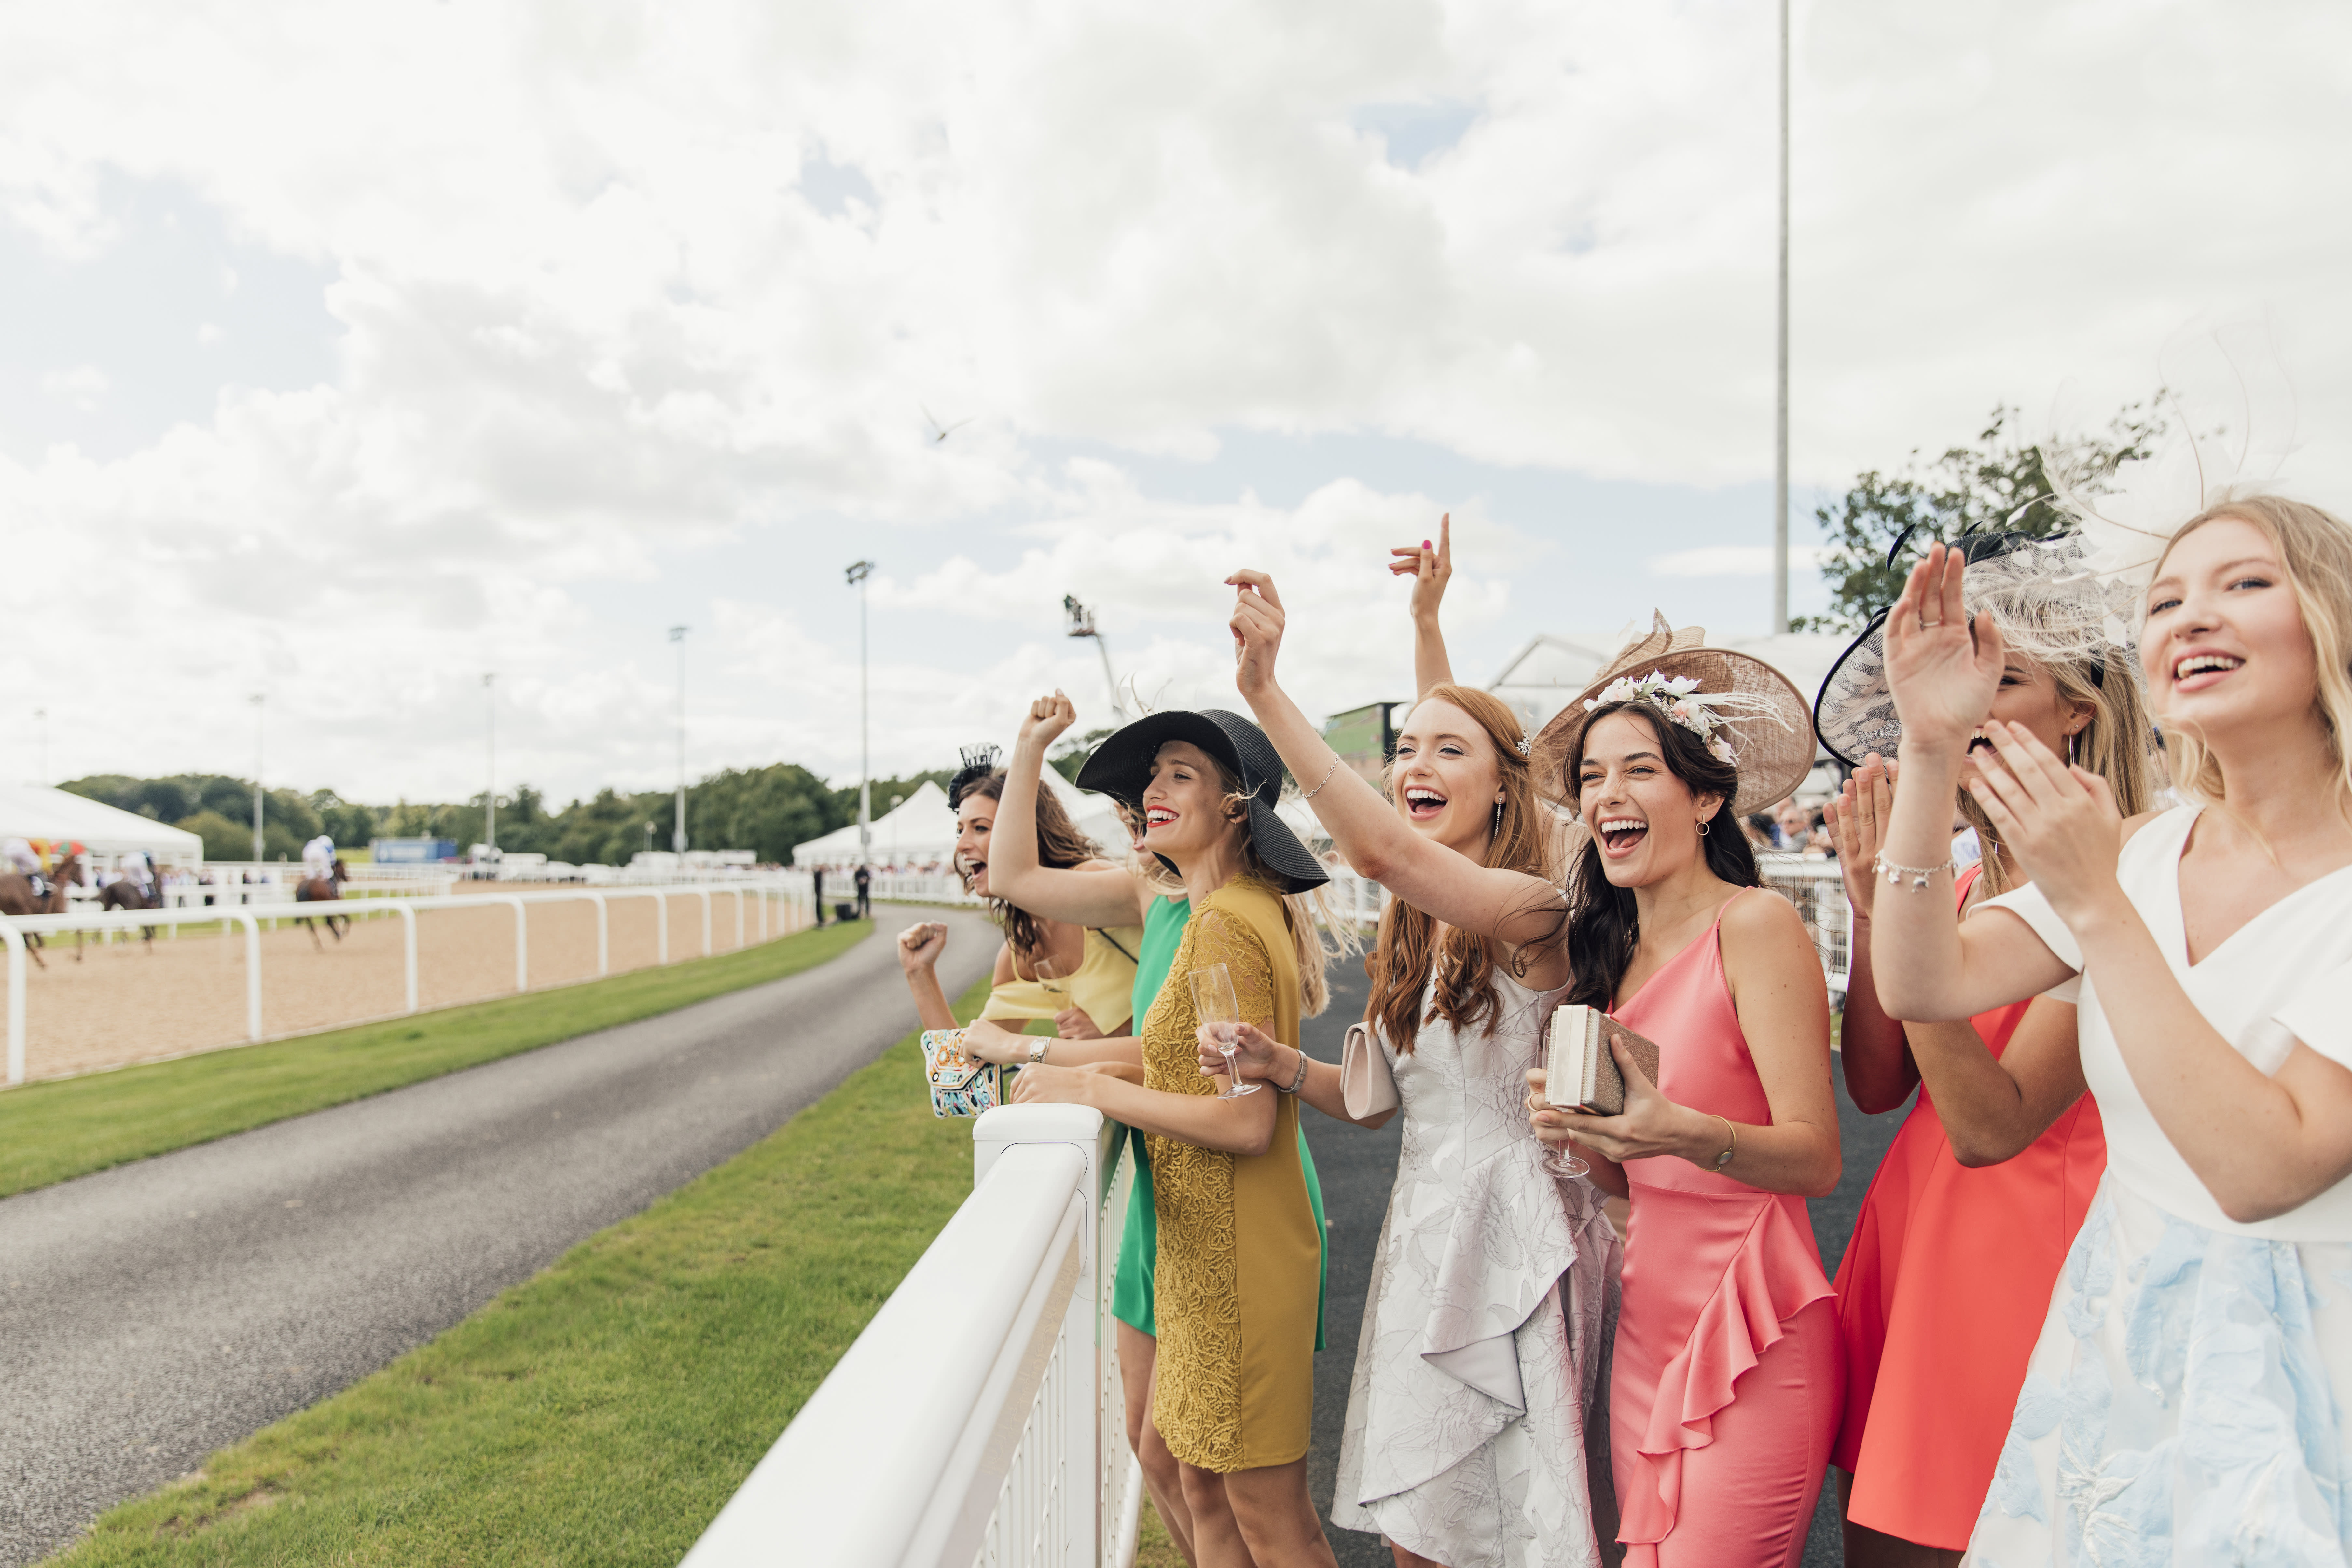 Group of ladies at the races